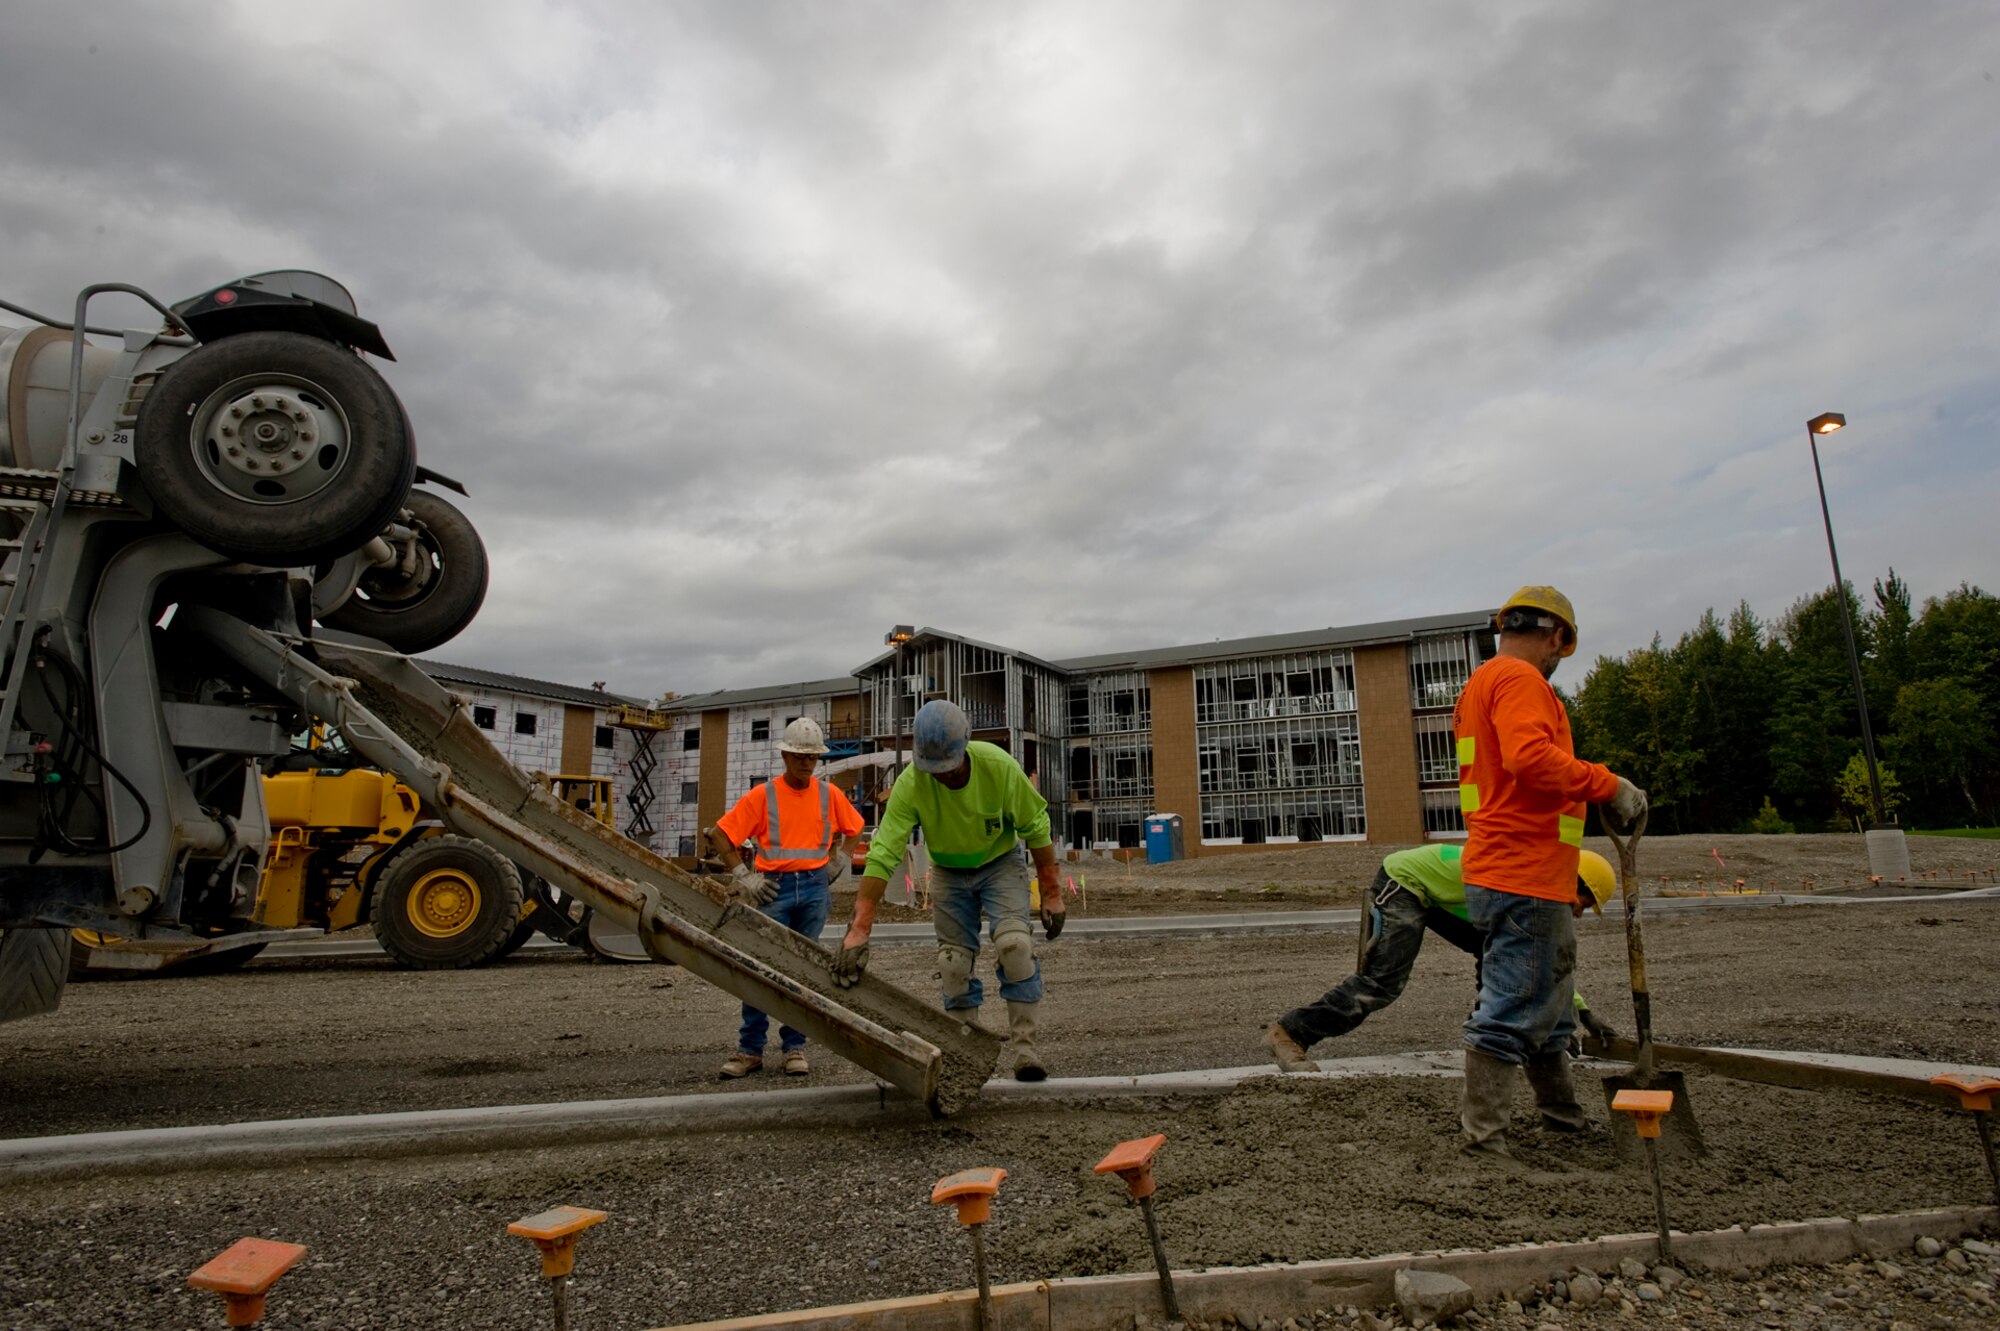 ELMENDORF AIR FORCE BASE, Alaska -- Members from Finishing Edge Concrete and Construction, lay down the foundation for a sidewalk in front of the new dorm  here Sept. 2. The new dorm project is being built by several different contract companies from the Anchorage community. The dorm is scheduled to be fully operational by mid-Febuary. (U.S. Air Force photo/Staff Sgt. Joshua Garcia)